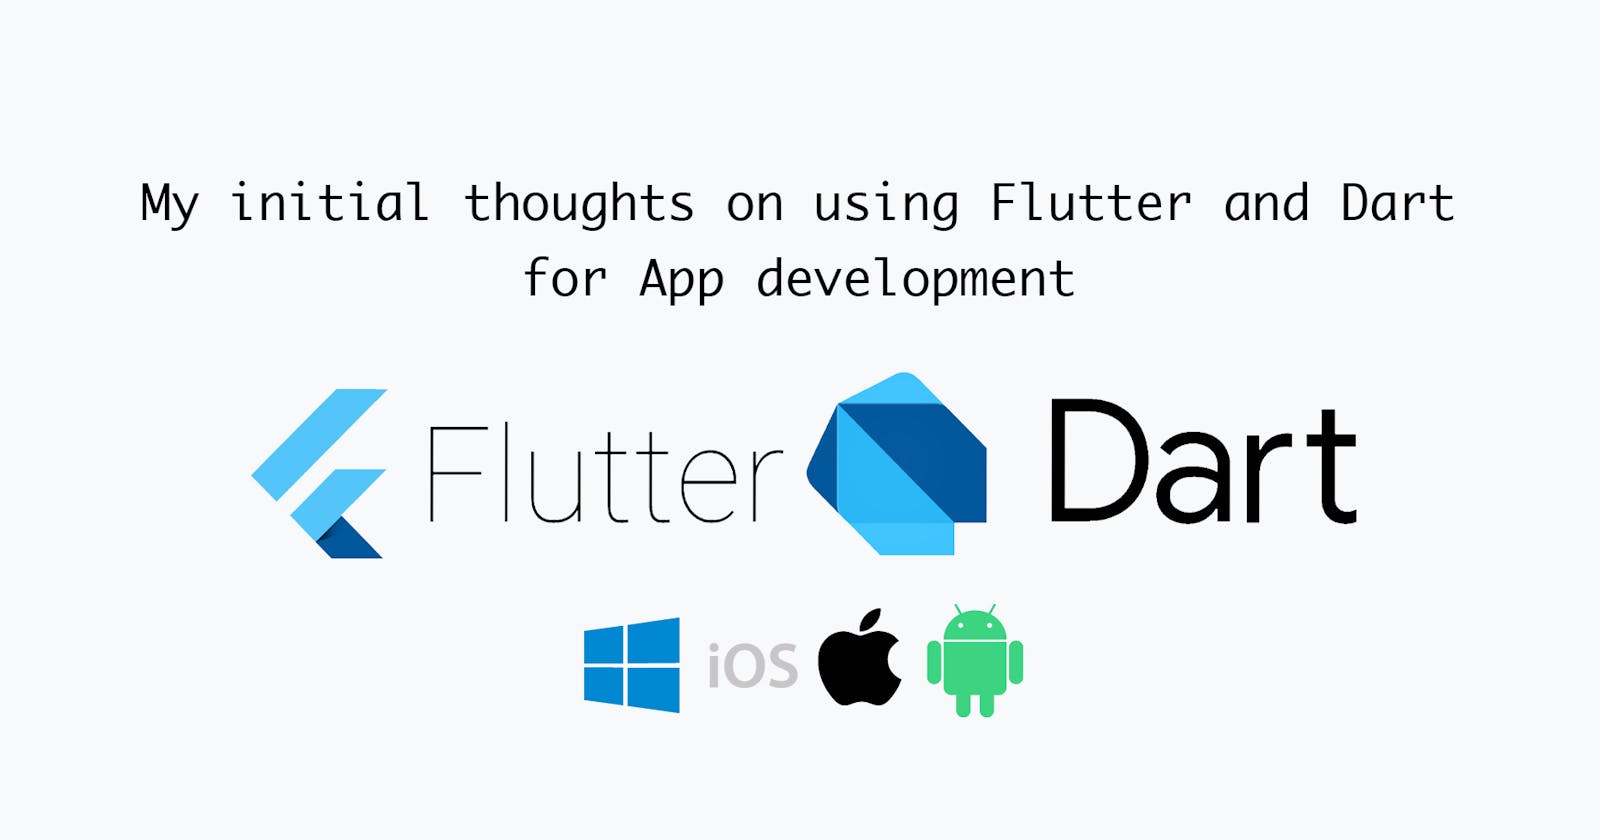 My initial thoughts on using Flutter and Dart for App development